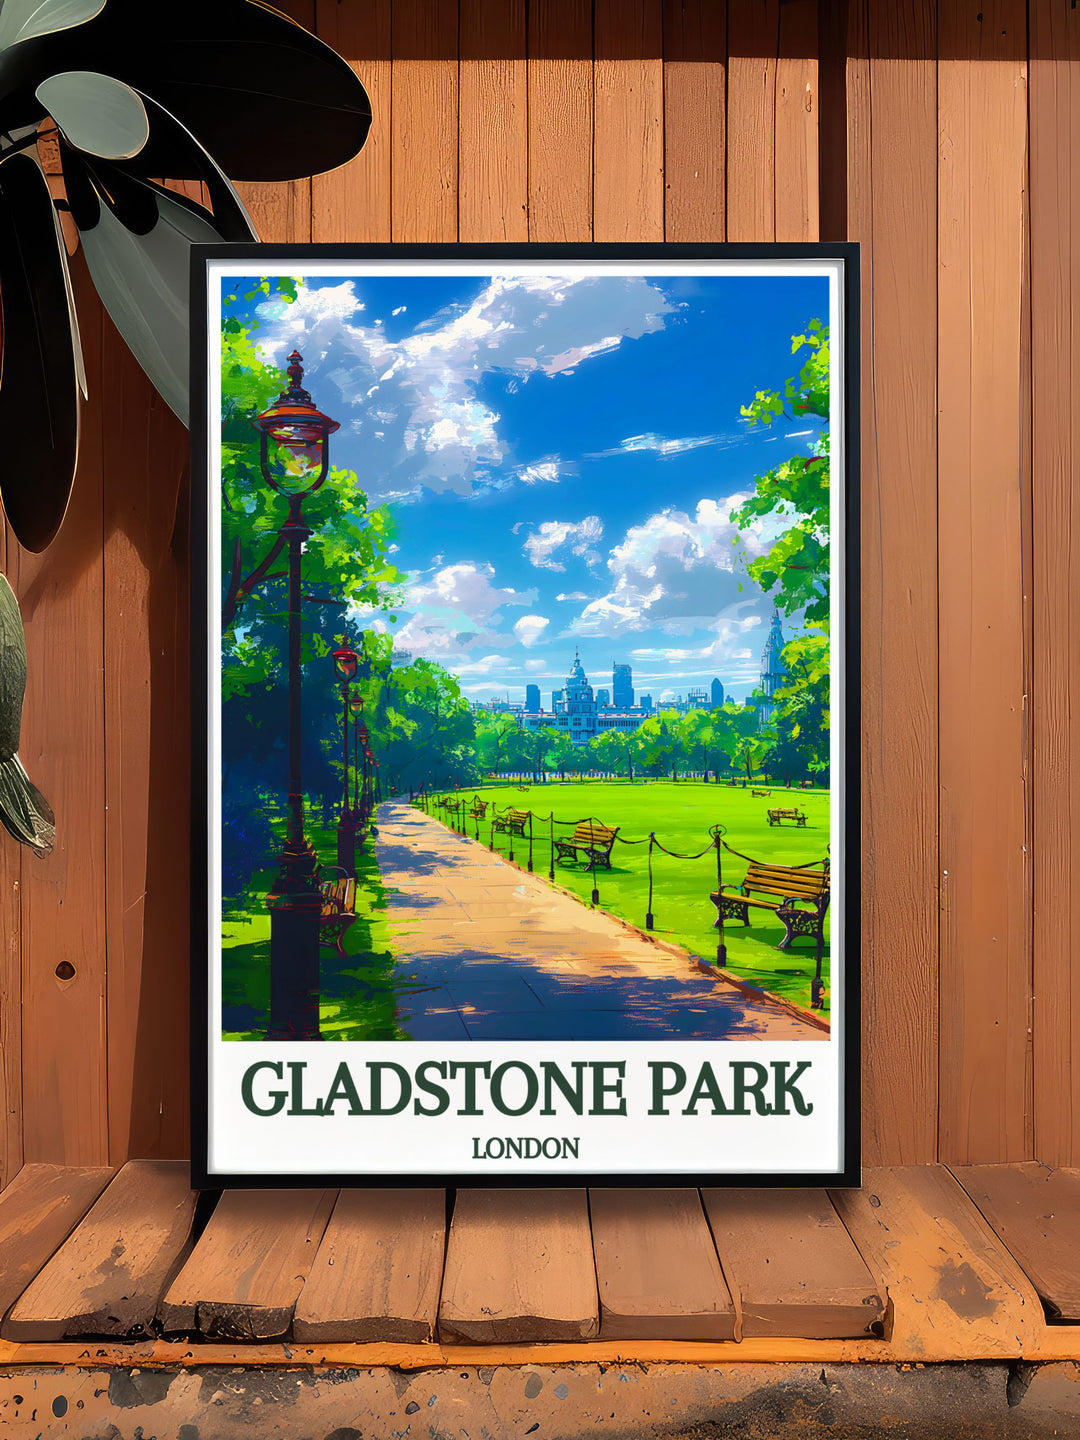 Framed art of Gladstone Park, emphasizing its lush landscapes and serene atmosphere, perfect for those who love the natural beauty and historical significance of London parks.